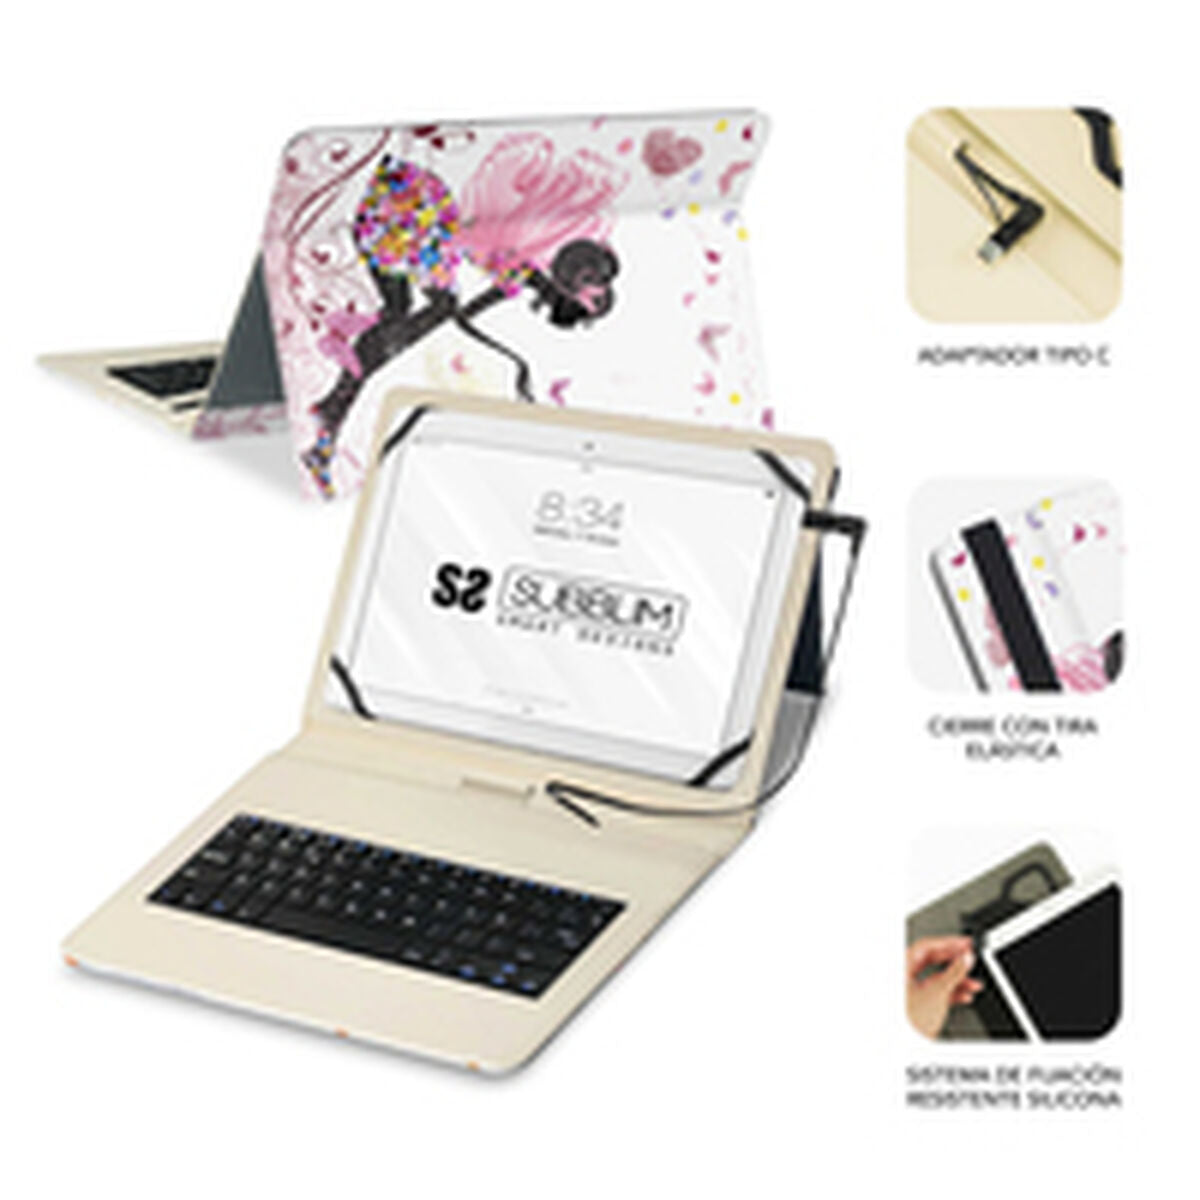 Bluetooth Keyboard with Support for Tablet Subblim SUBKT1-USB052 Spanish Qwerty Multicolour Spanish